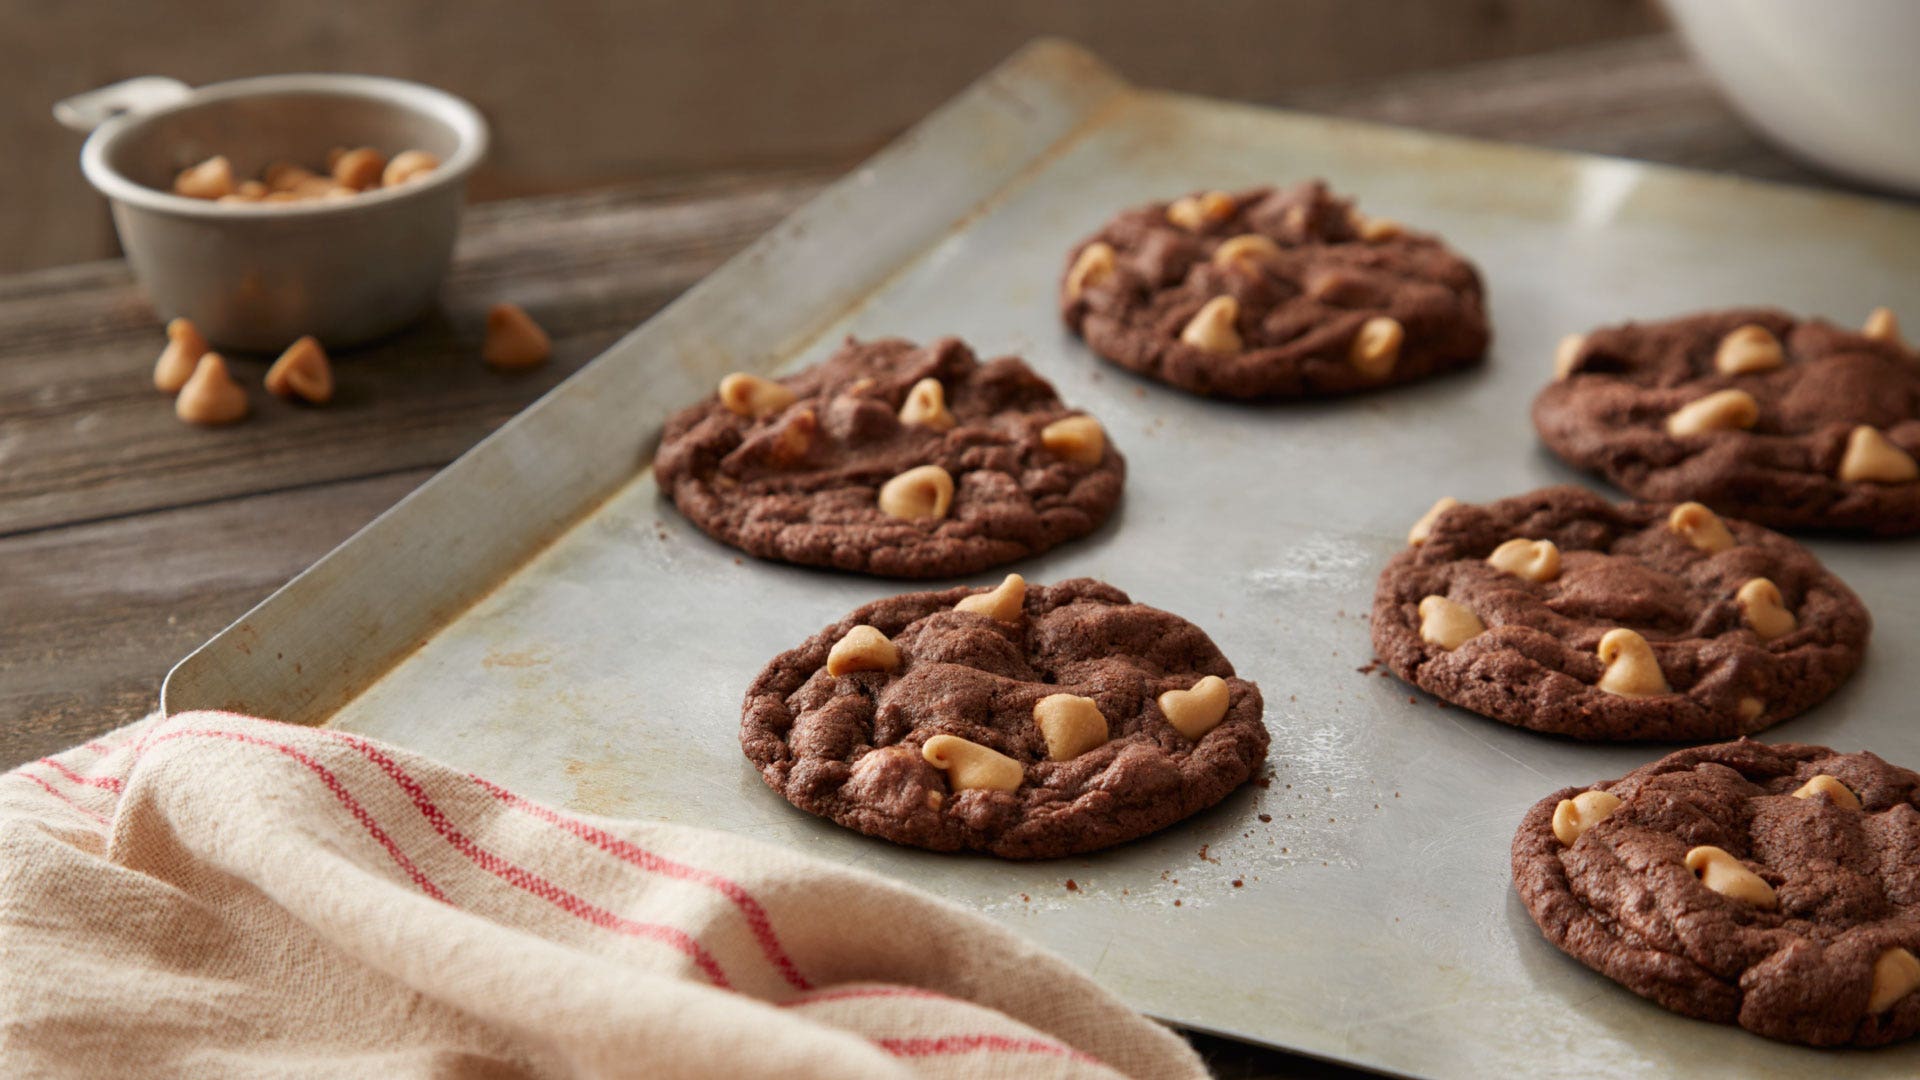 REESE’S Chewy Chocolate Cookies